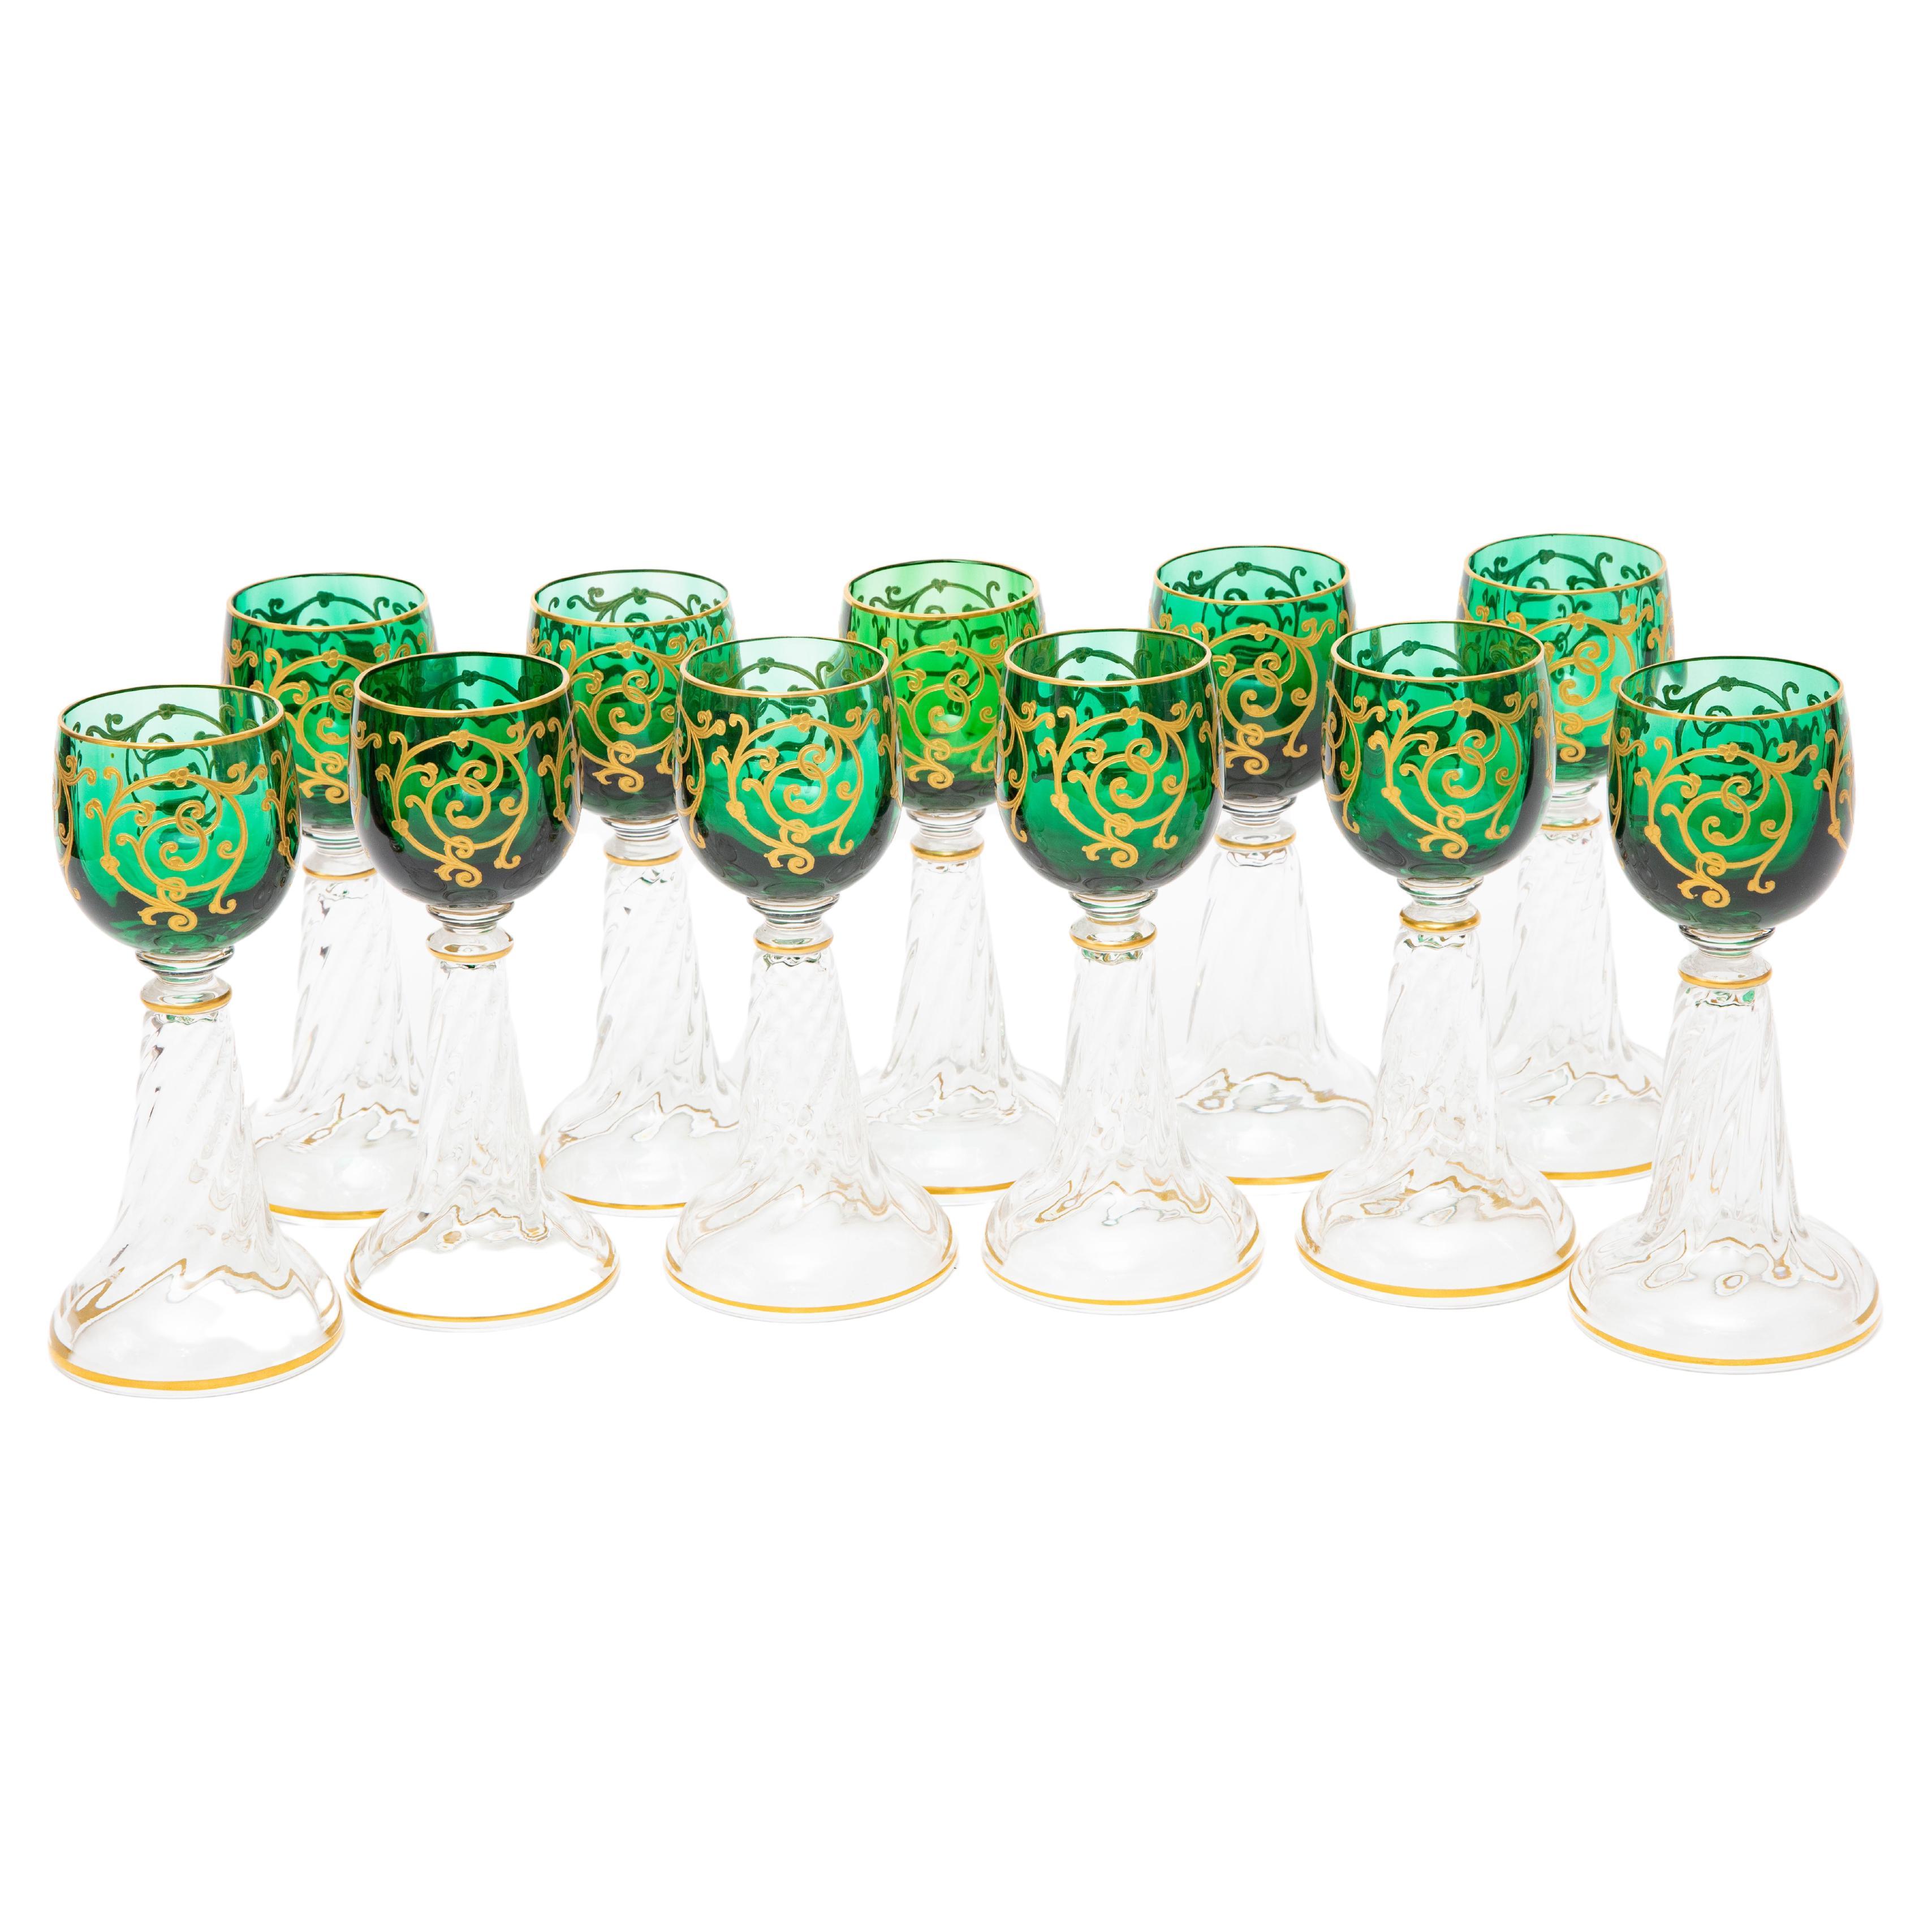 A striking set of 10 antique wine goblets with a hollow trumpet based and gorgeous raised tooled gilding on a dark green ground. Unique and in quite lovely antique condition. These will mix and match in with all your fine table top